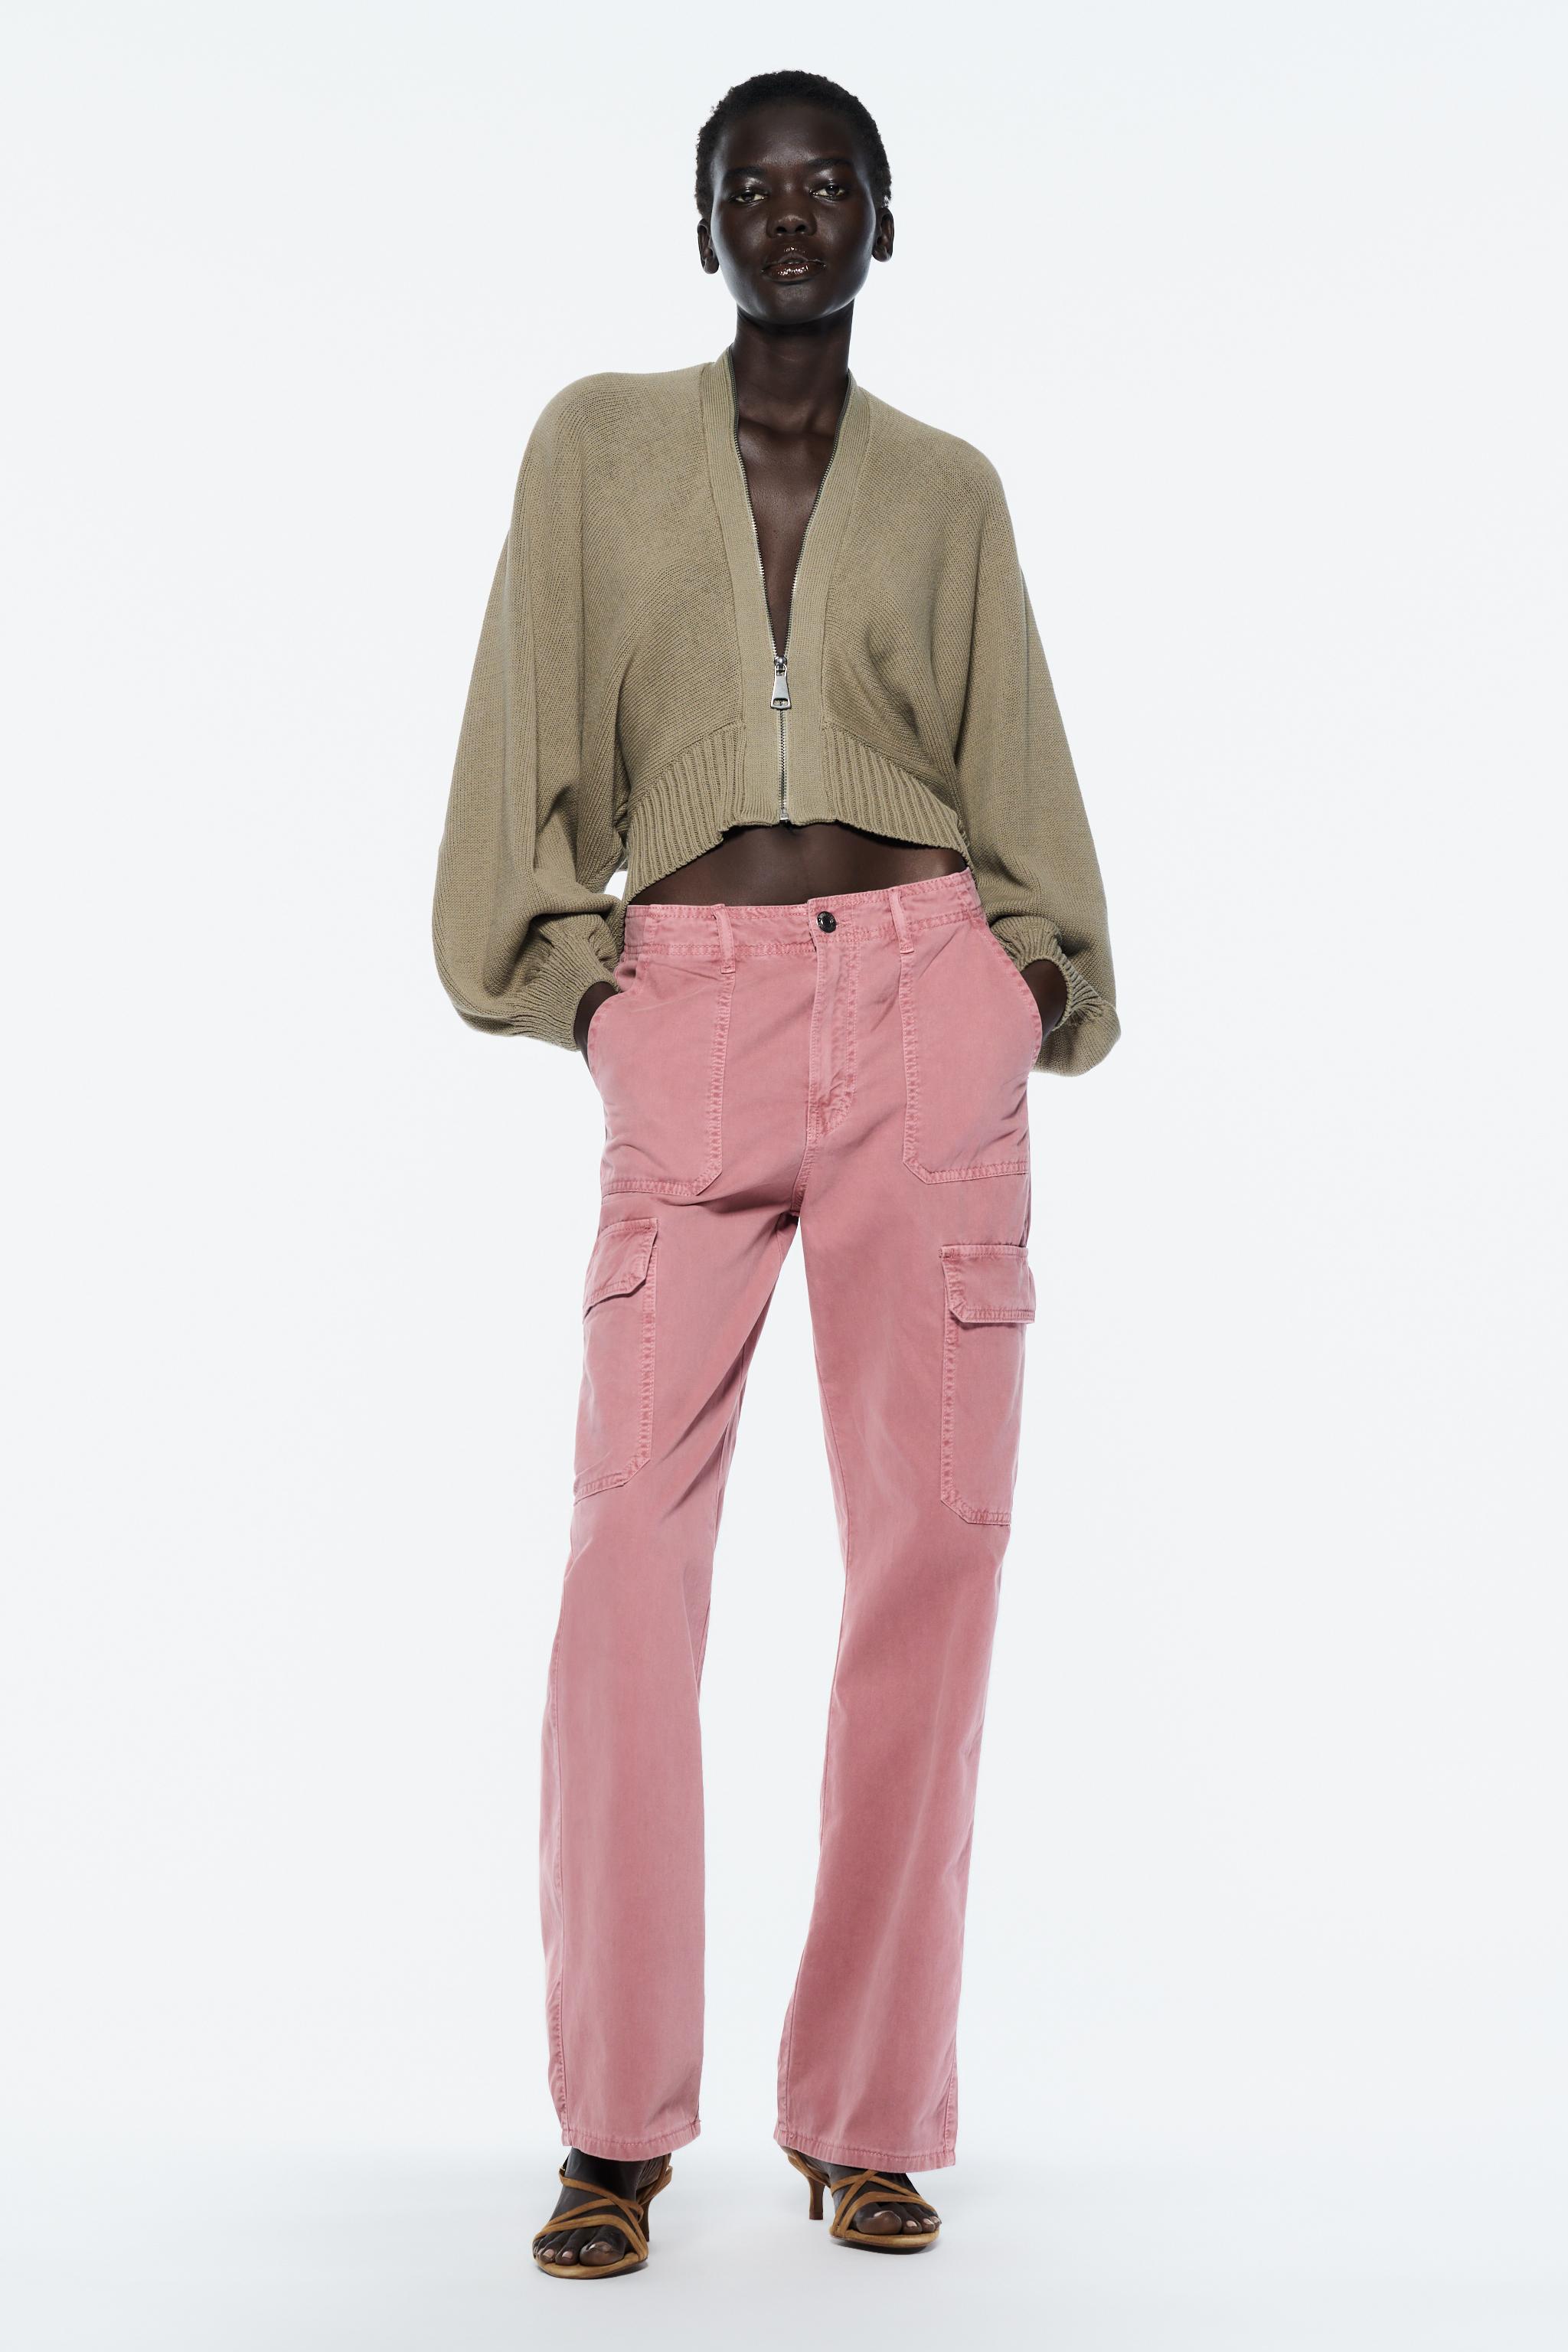 Zara - Pink Trousers with Belt, Women's Fashion, Bottoms, Other